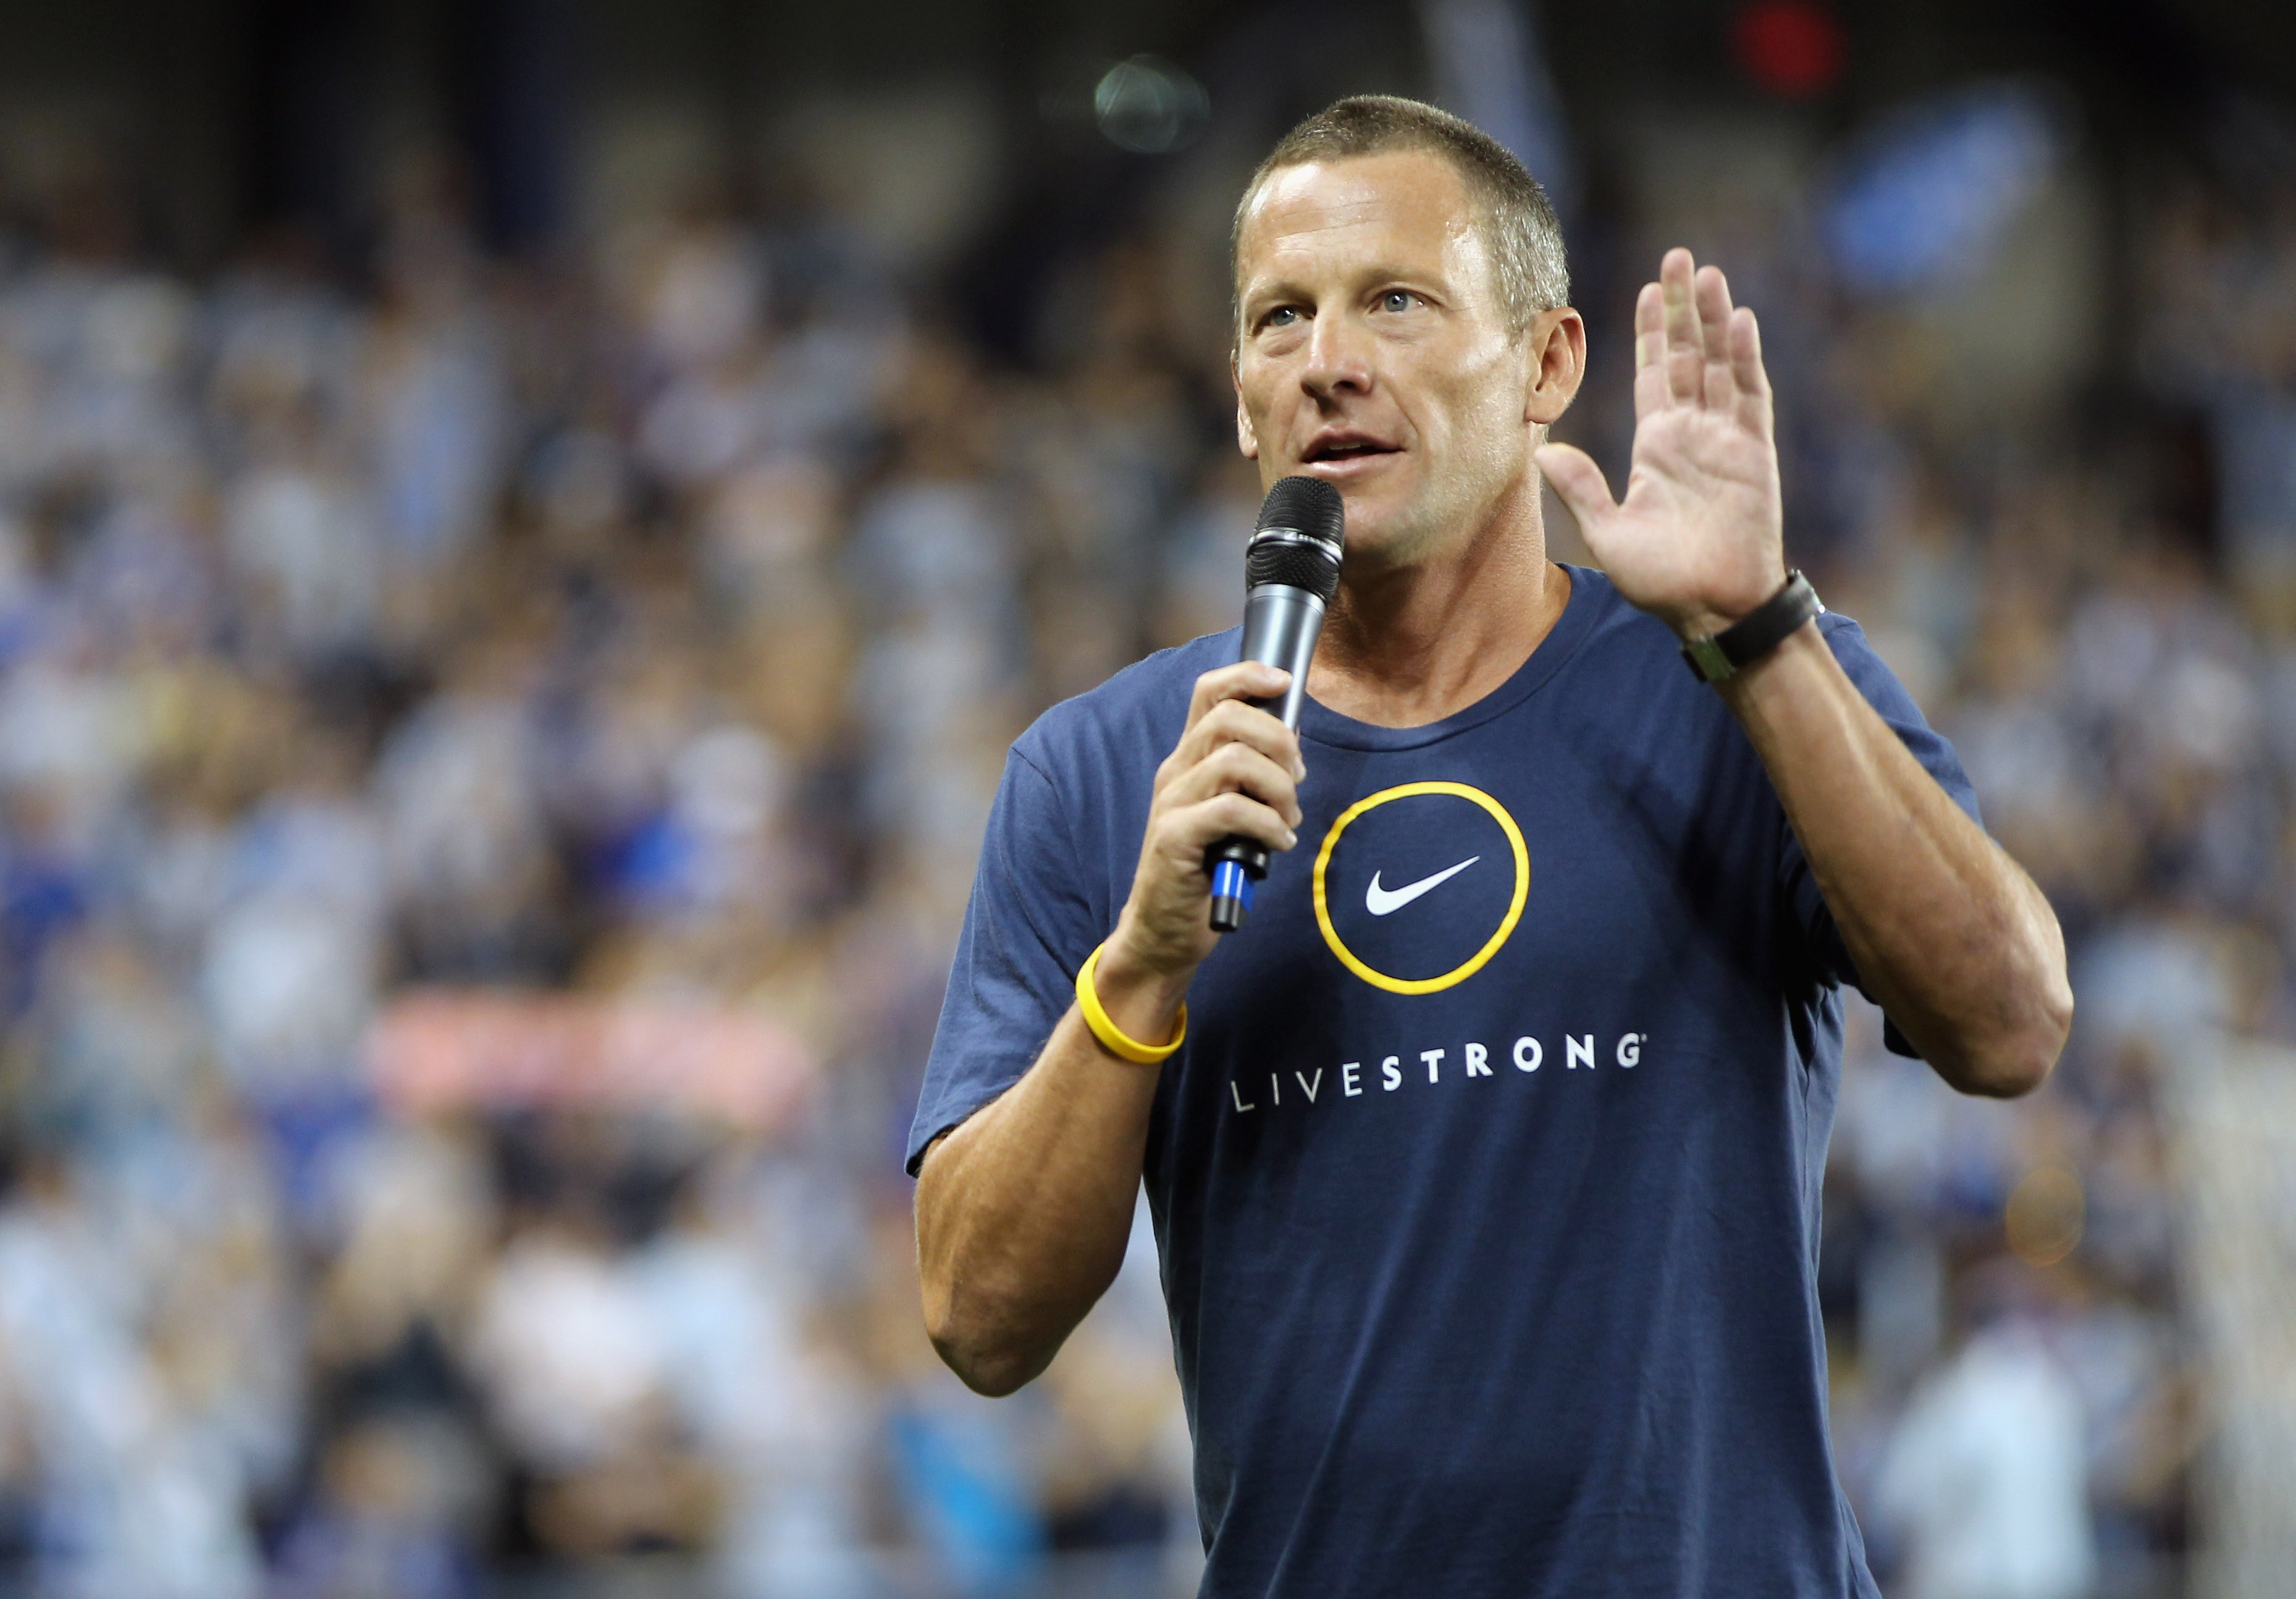 Livestrong expects complete truth from Lance Armstrong - CBS ...